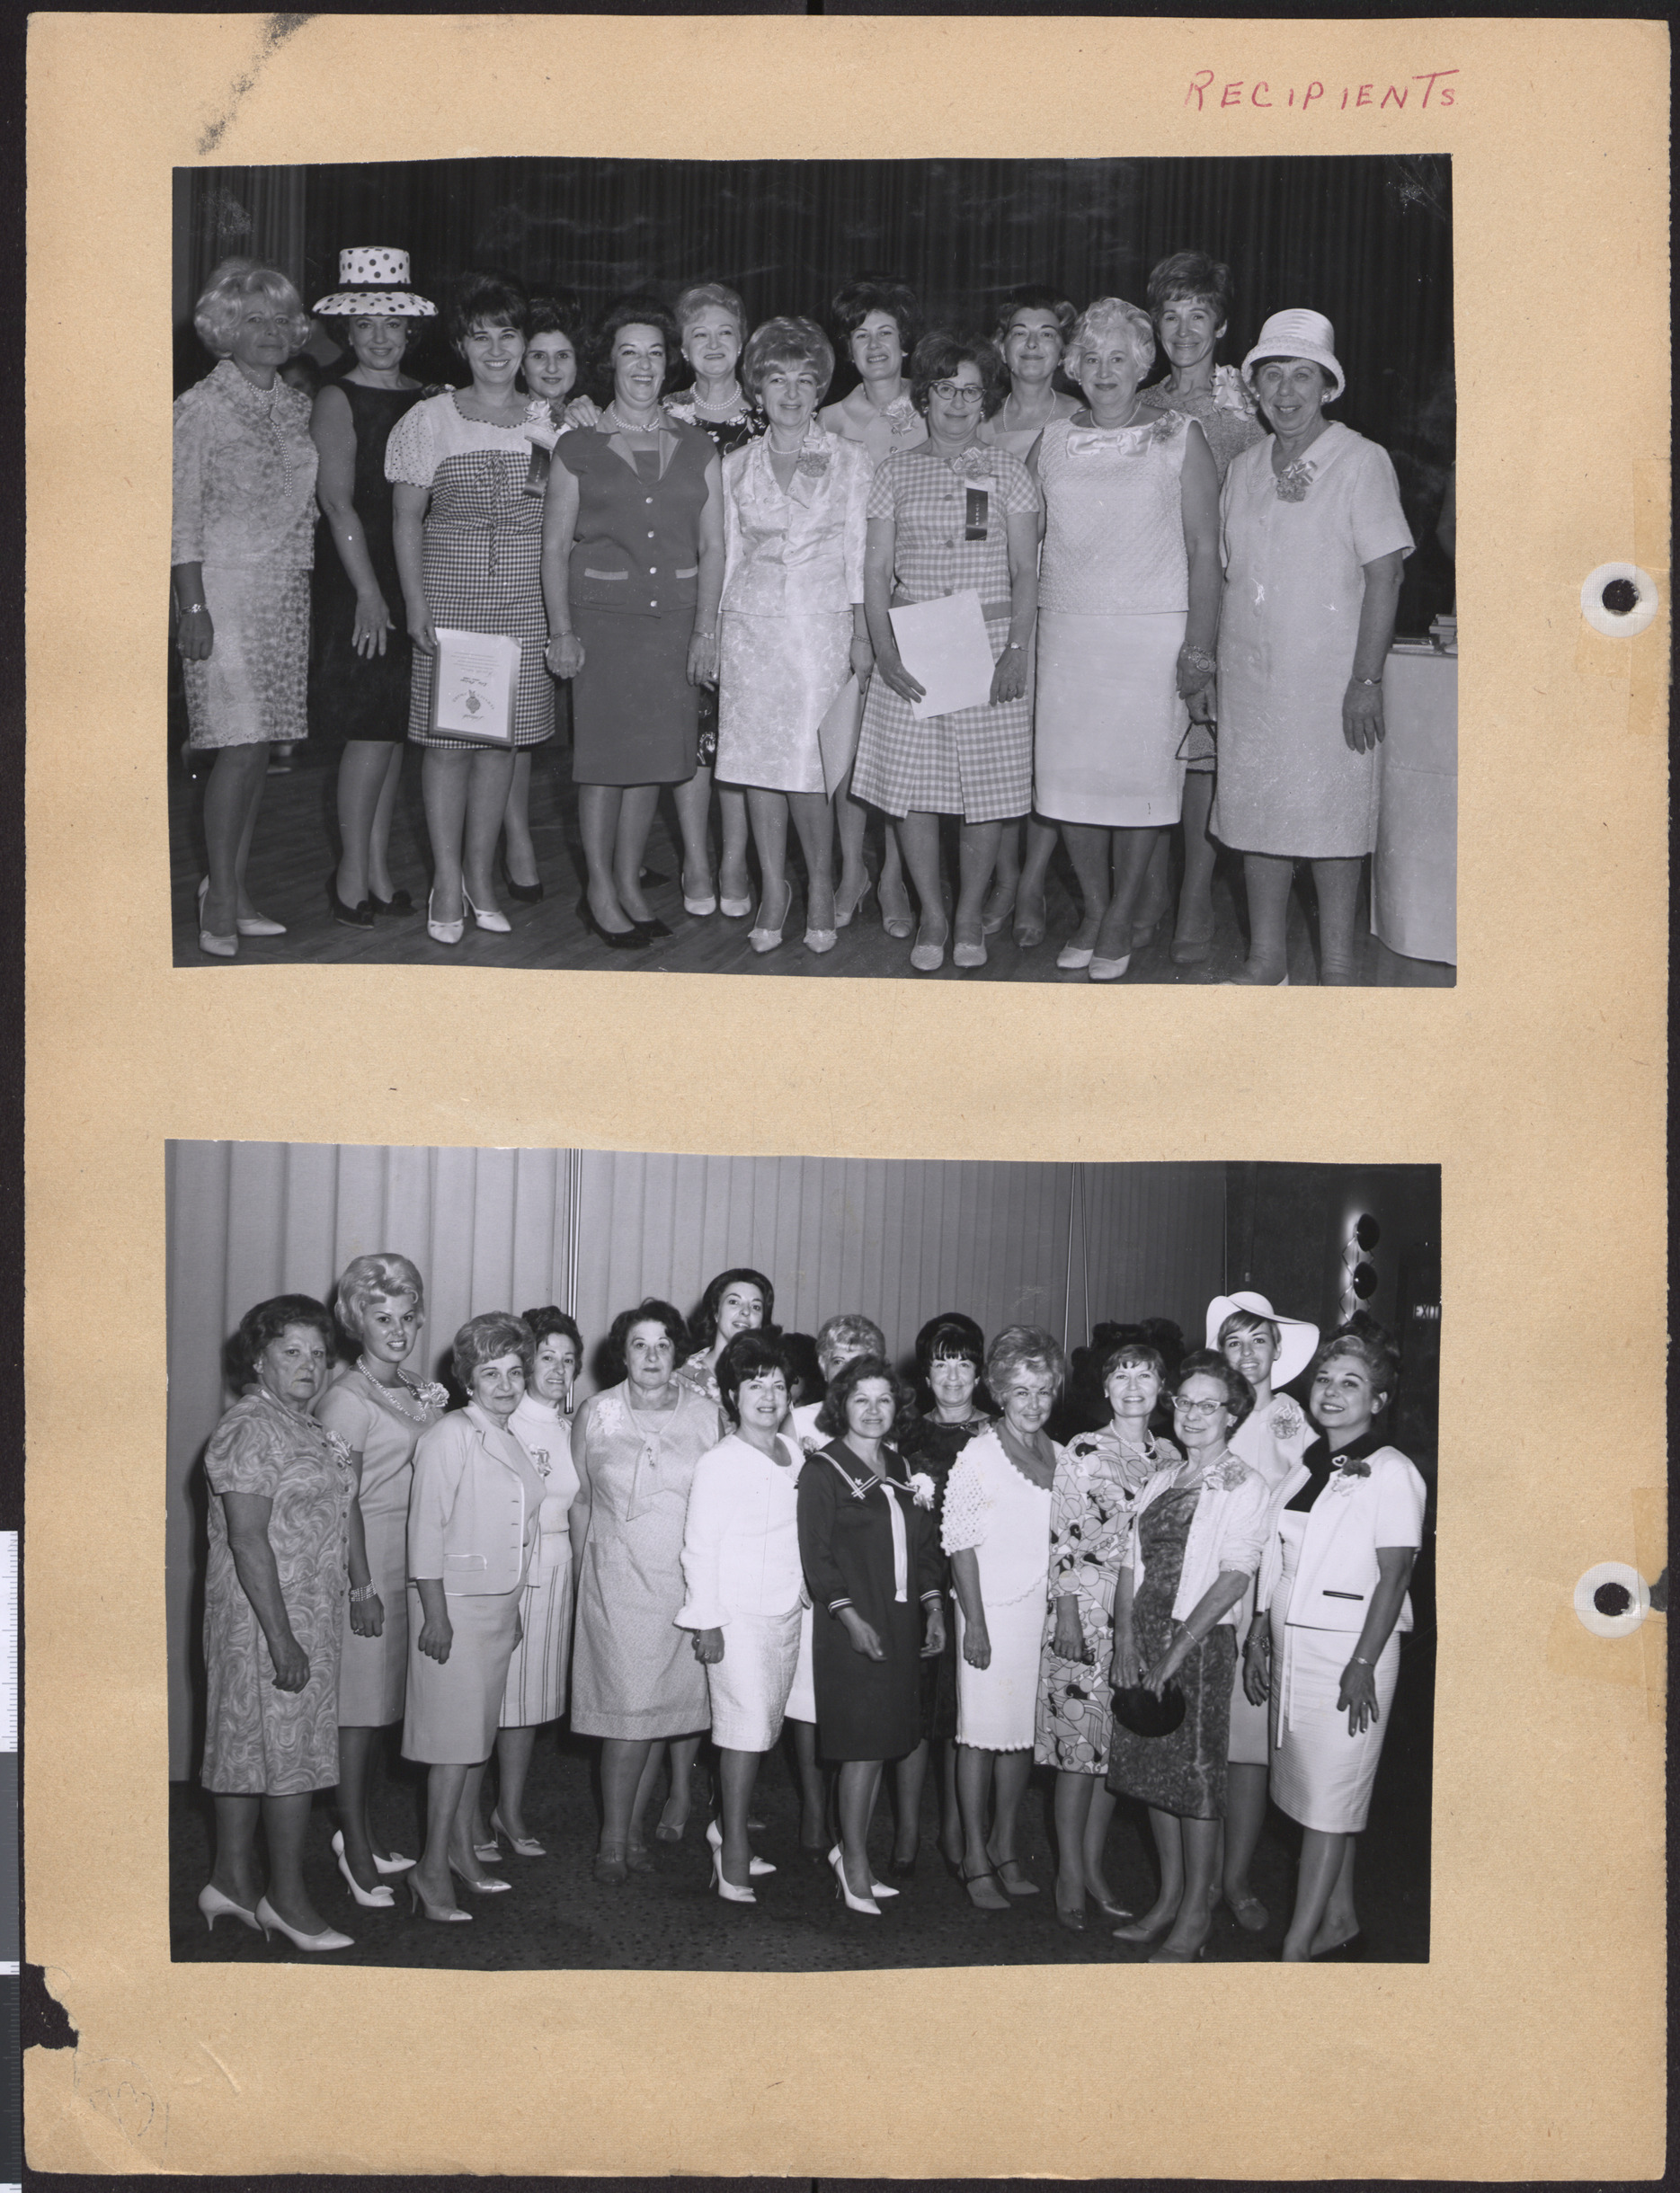 Photographs of Hadassah's Second Donor Luncheon Service Award Recipients, May 16, 1966